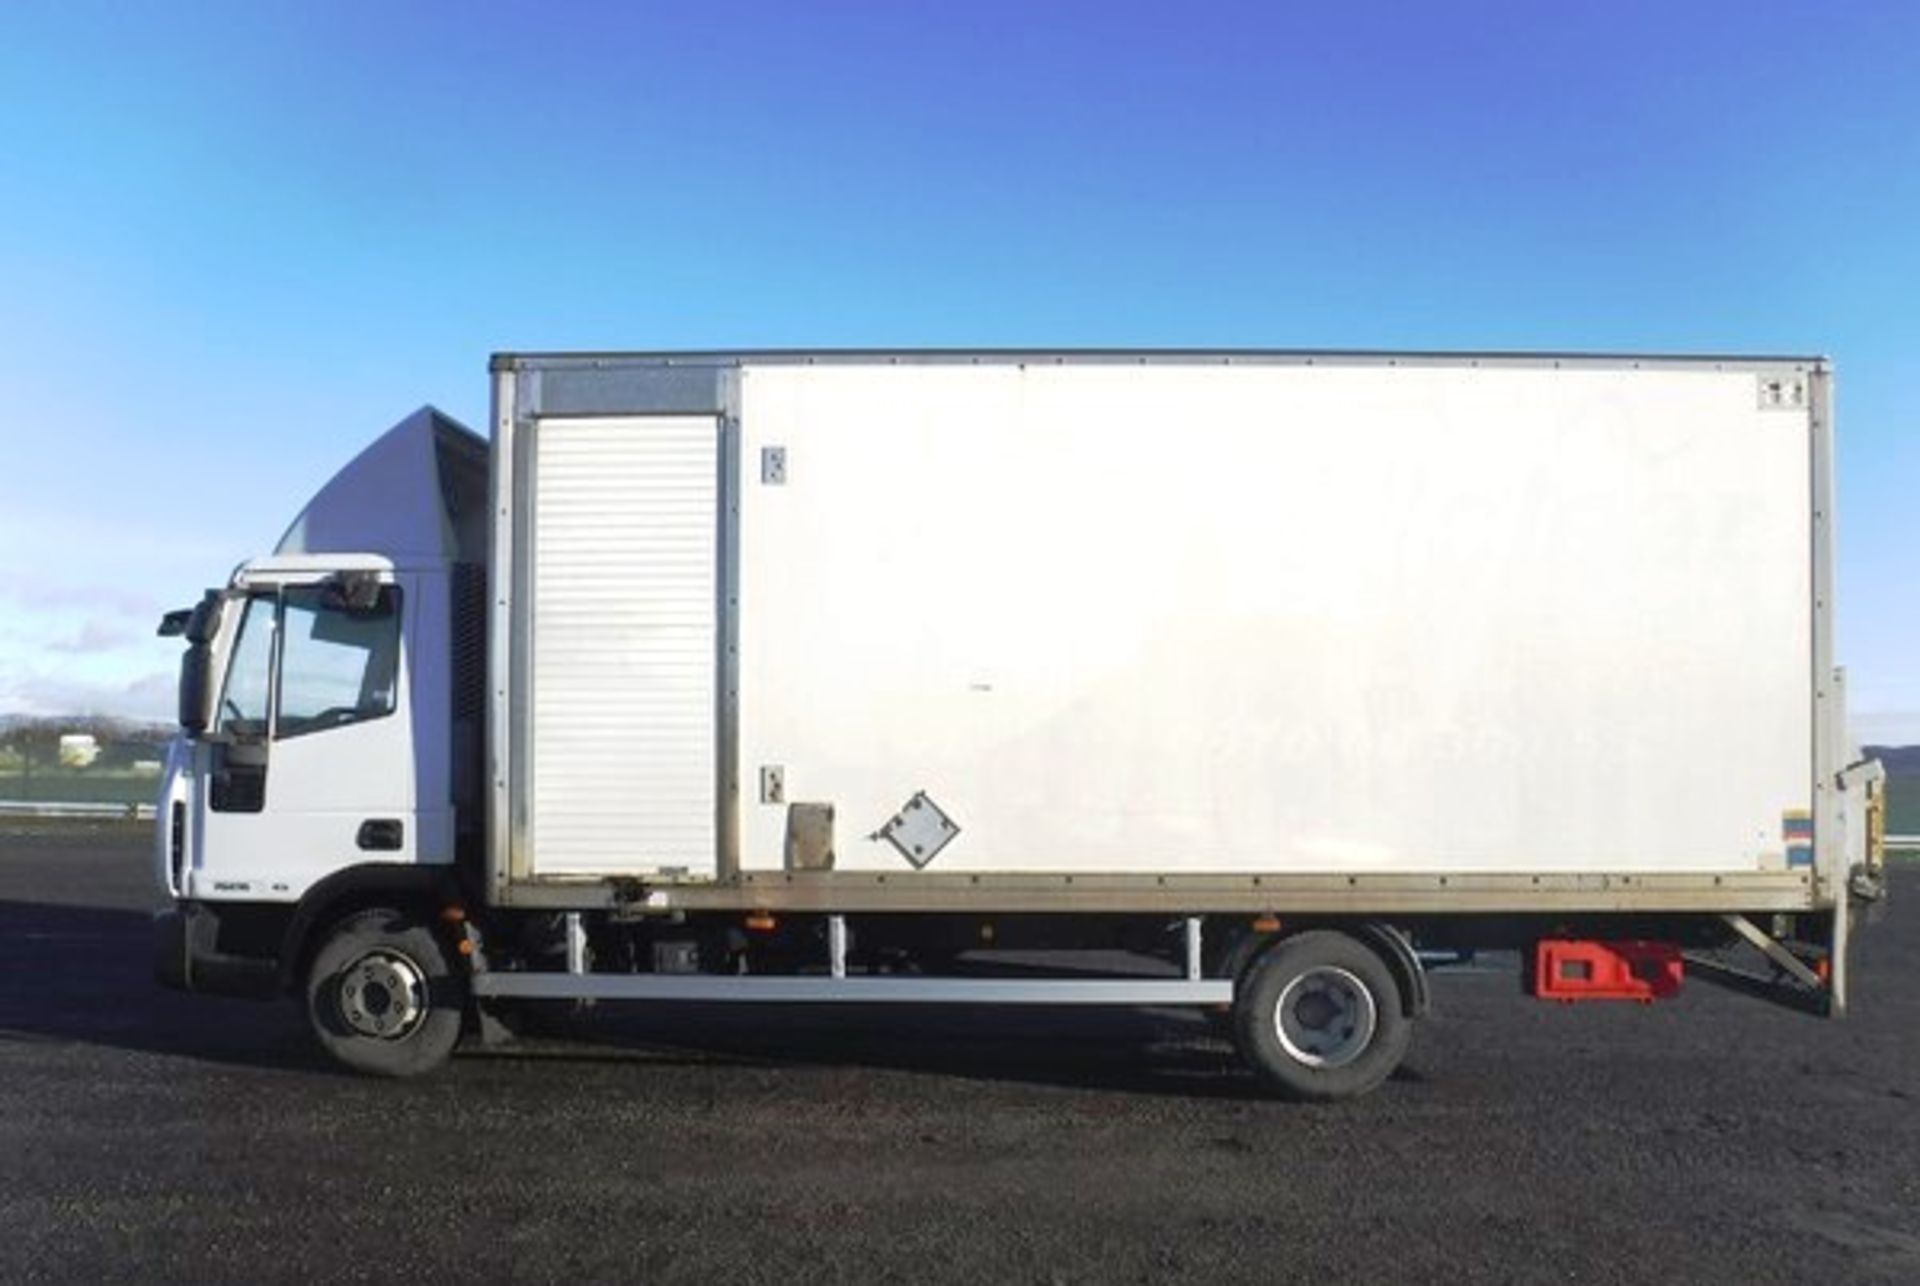 IVECO MODEL EUROCARGO (MY 2008) - 3920cc - Image 23 of 24